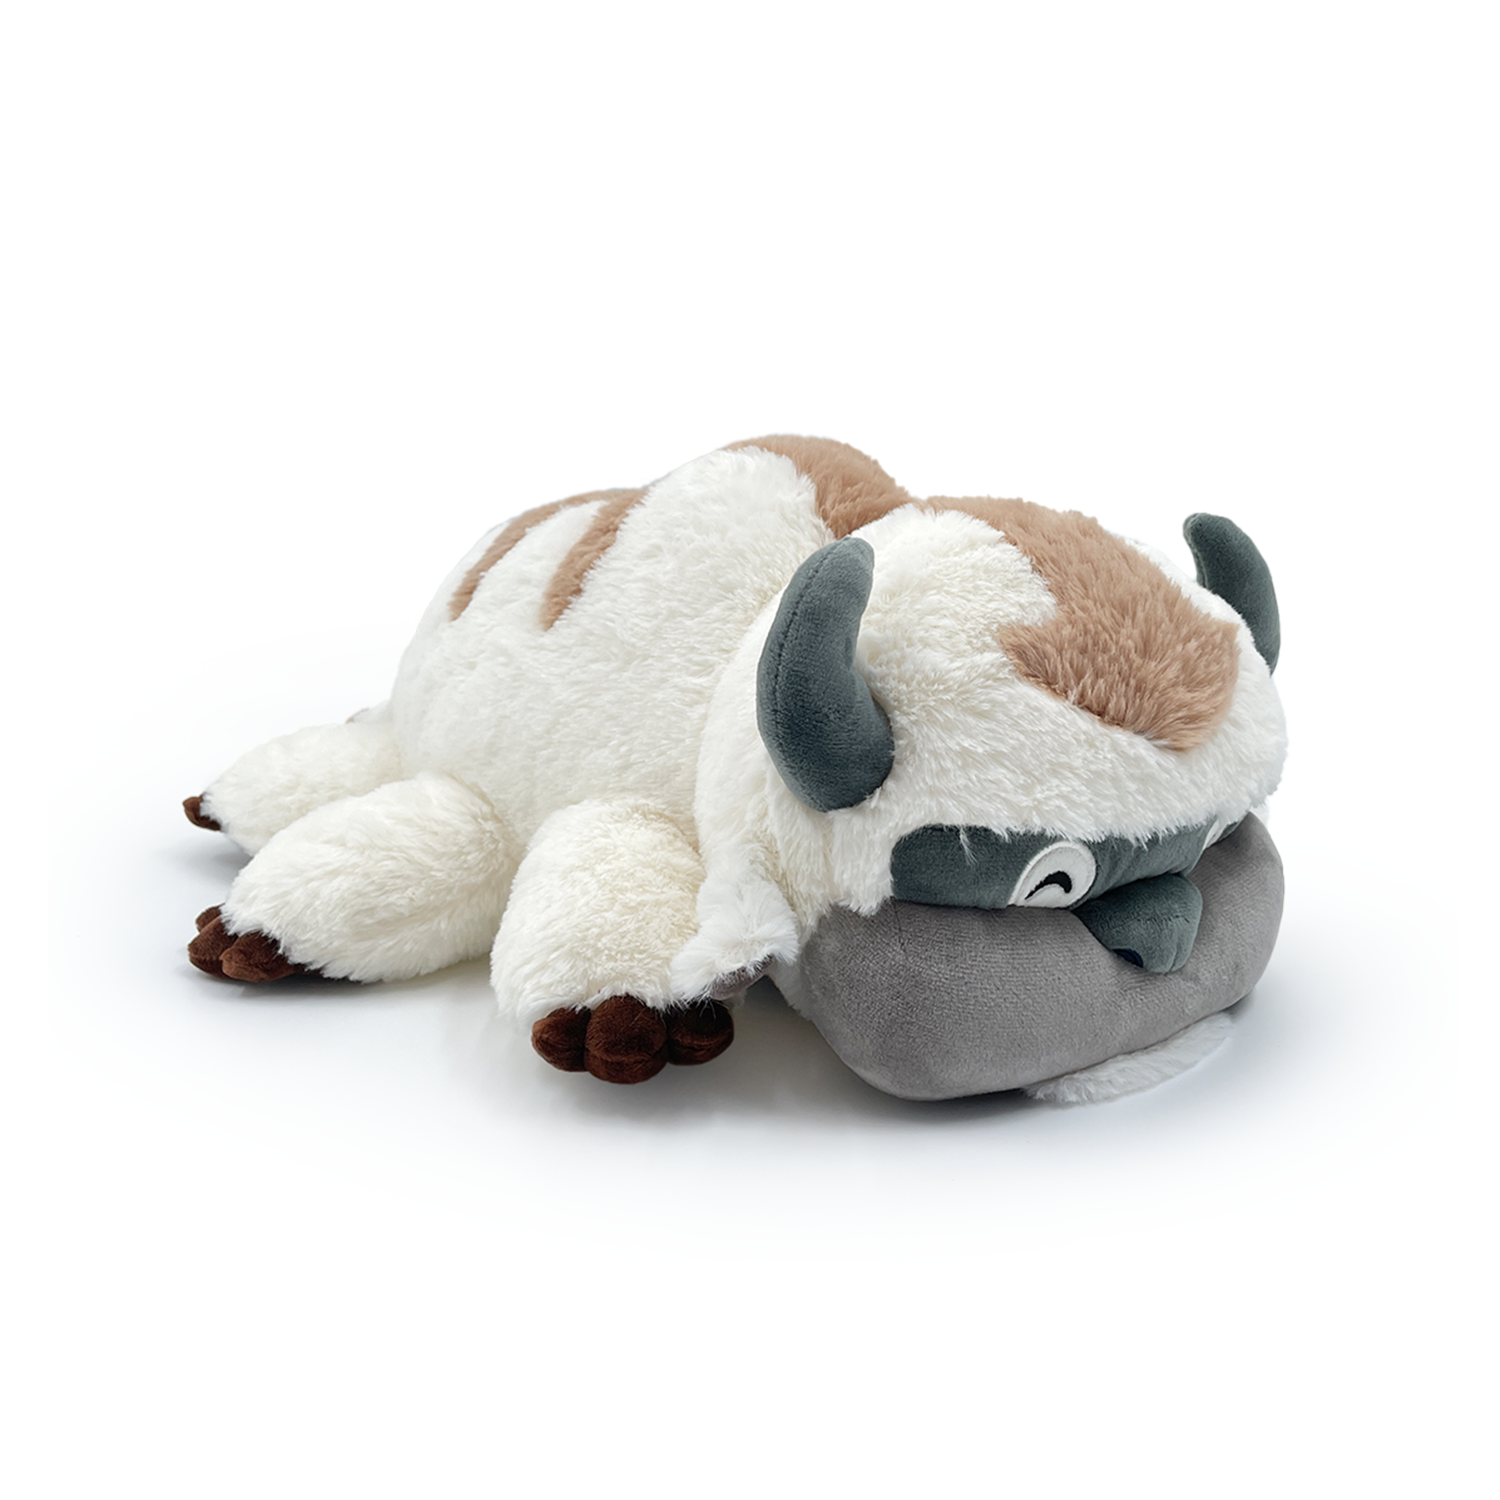 Appa Weighted Plush (16in) – Youtooz Collectibles